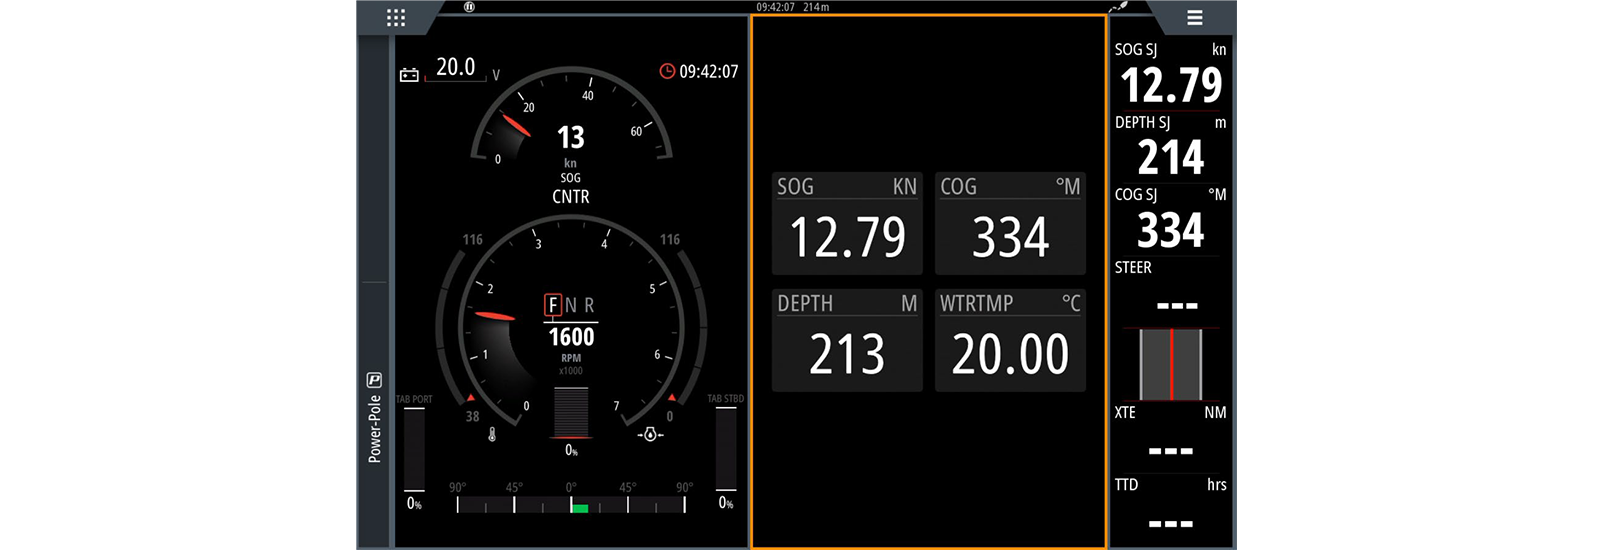 simrad-instruments-software-update.png